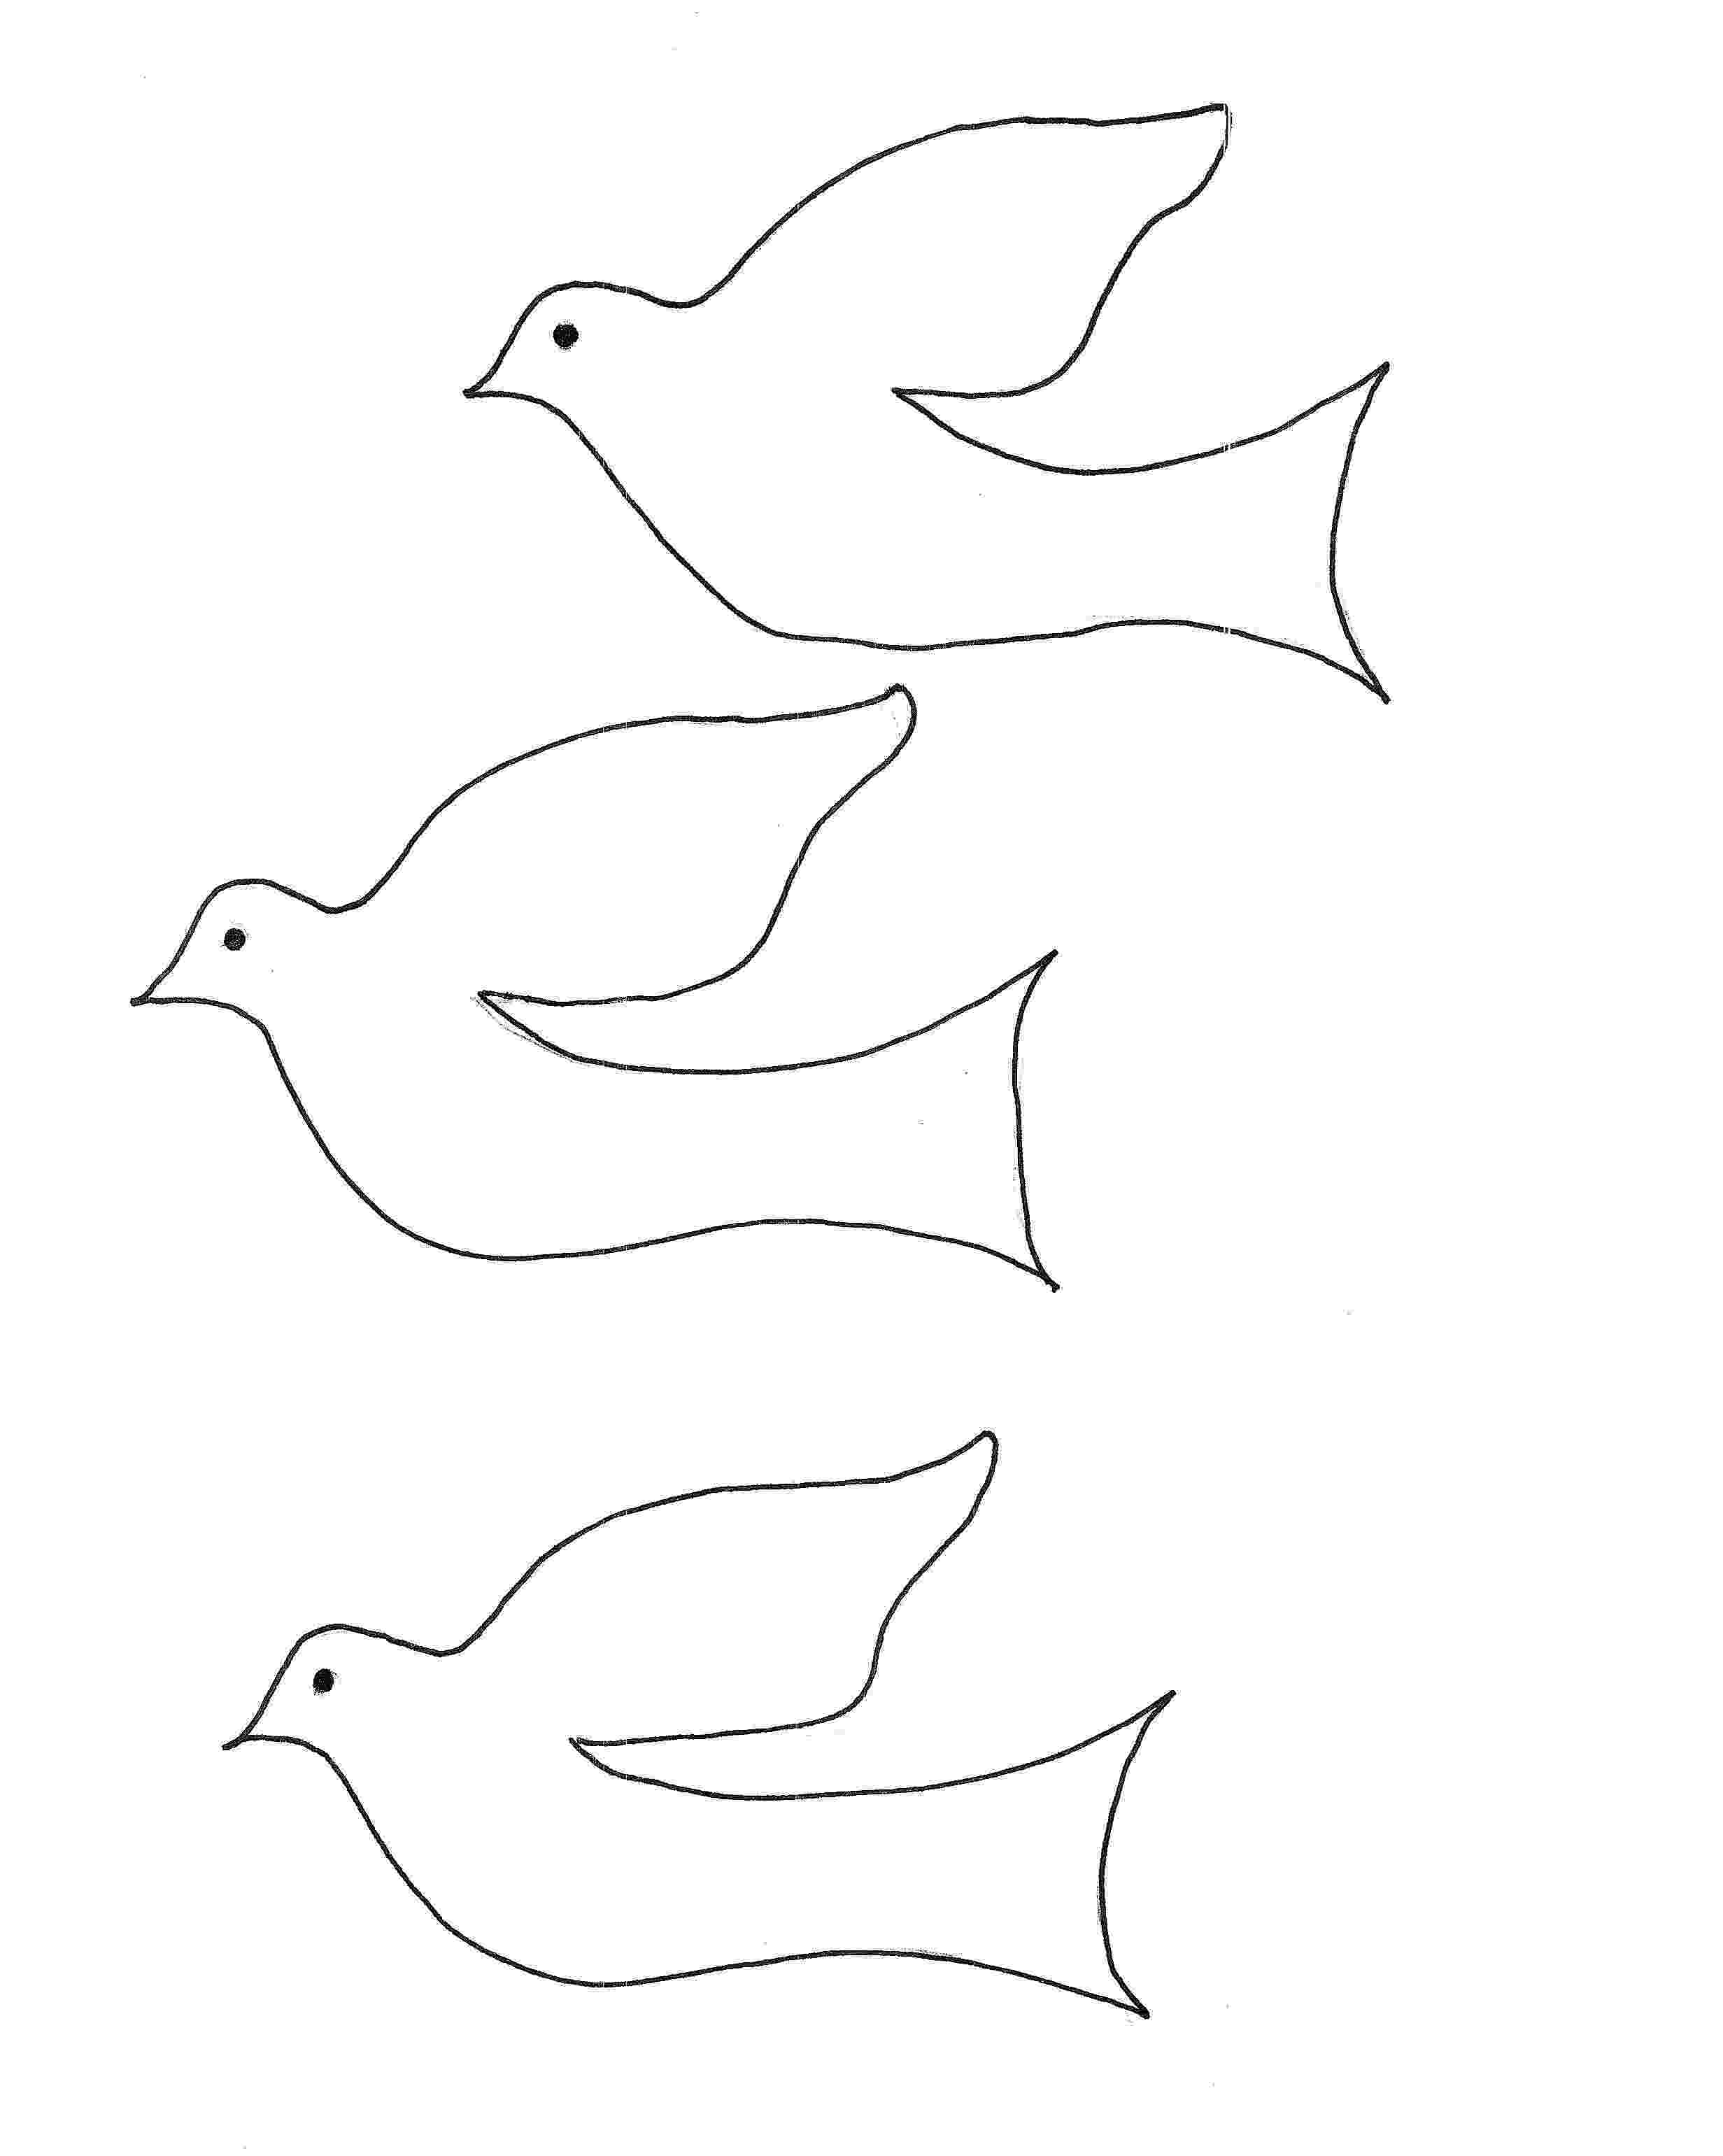 doves coloring pages september 2013 team colors coloring doves pages 